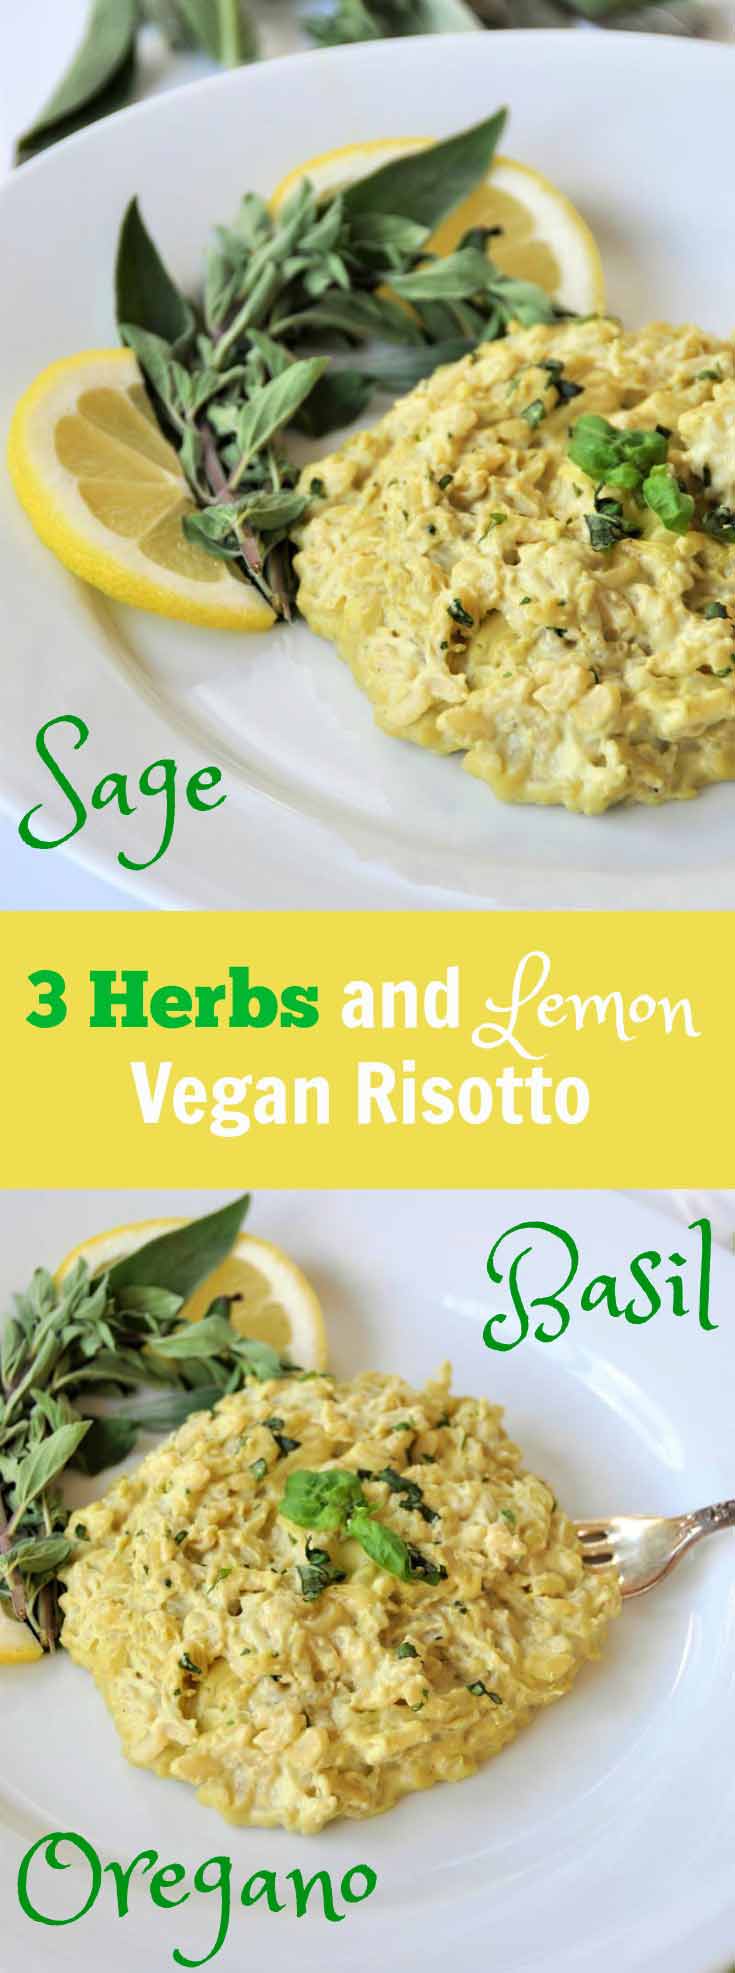 Creamy lemon and herb risotto. Vegan! Made with fresh oregano, sage, basil, and lemon. The perfect spring dinner.